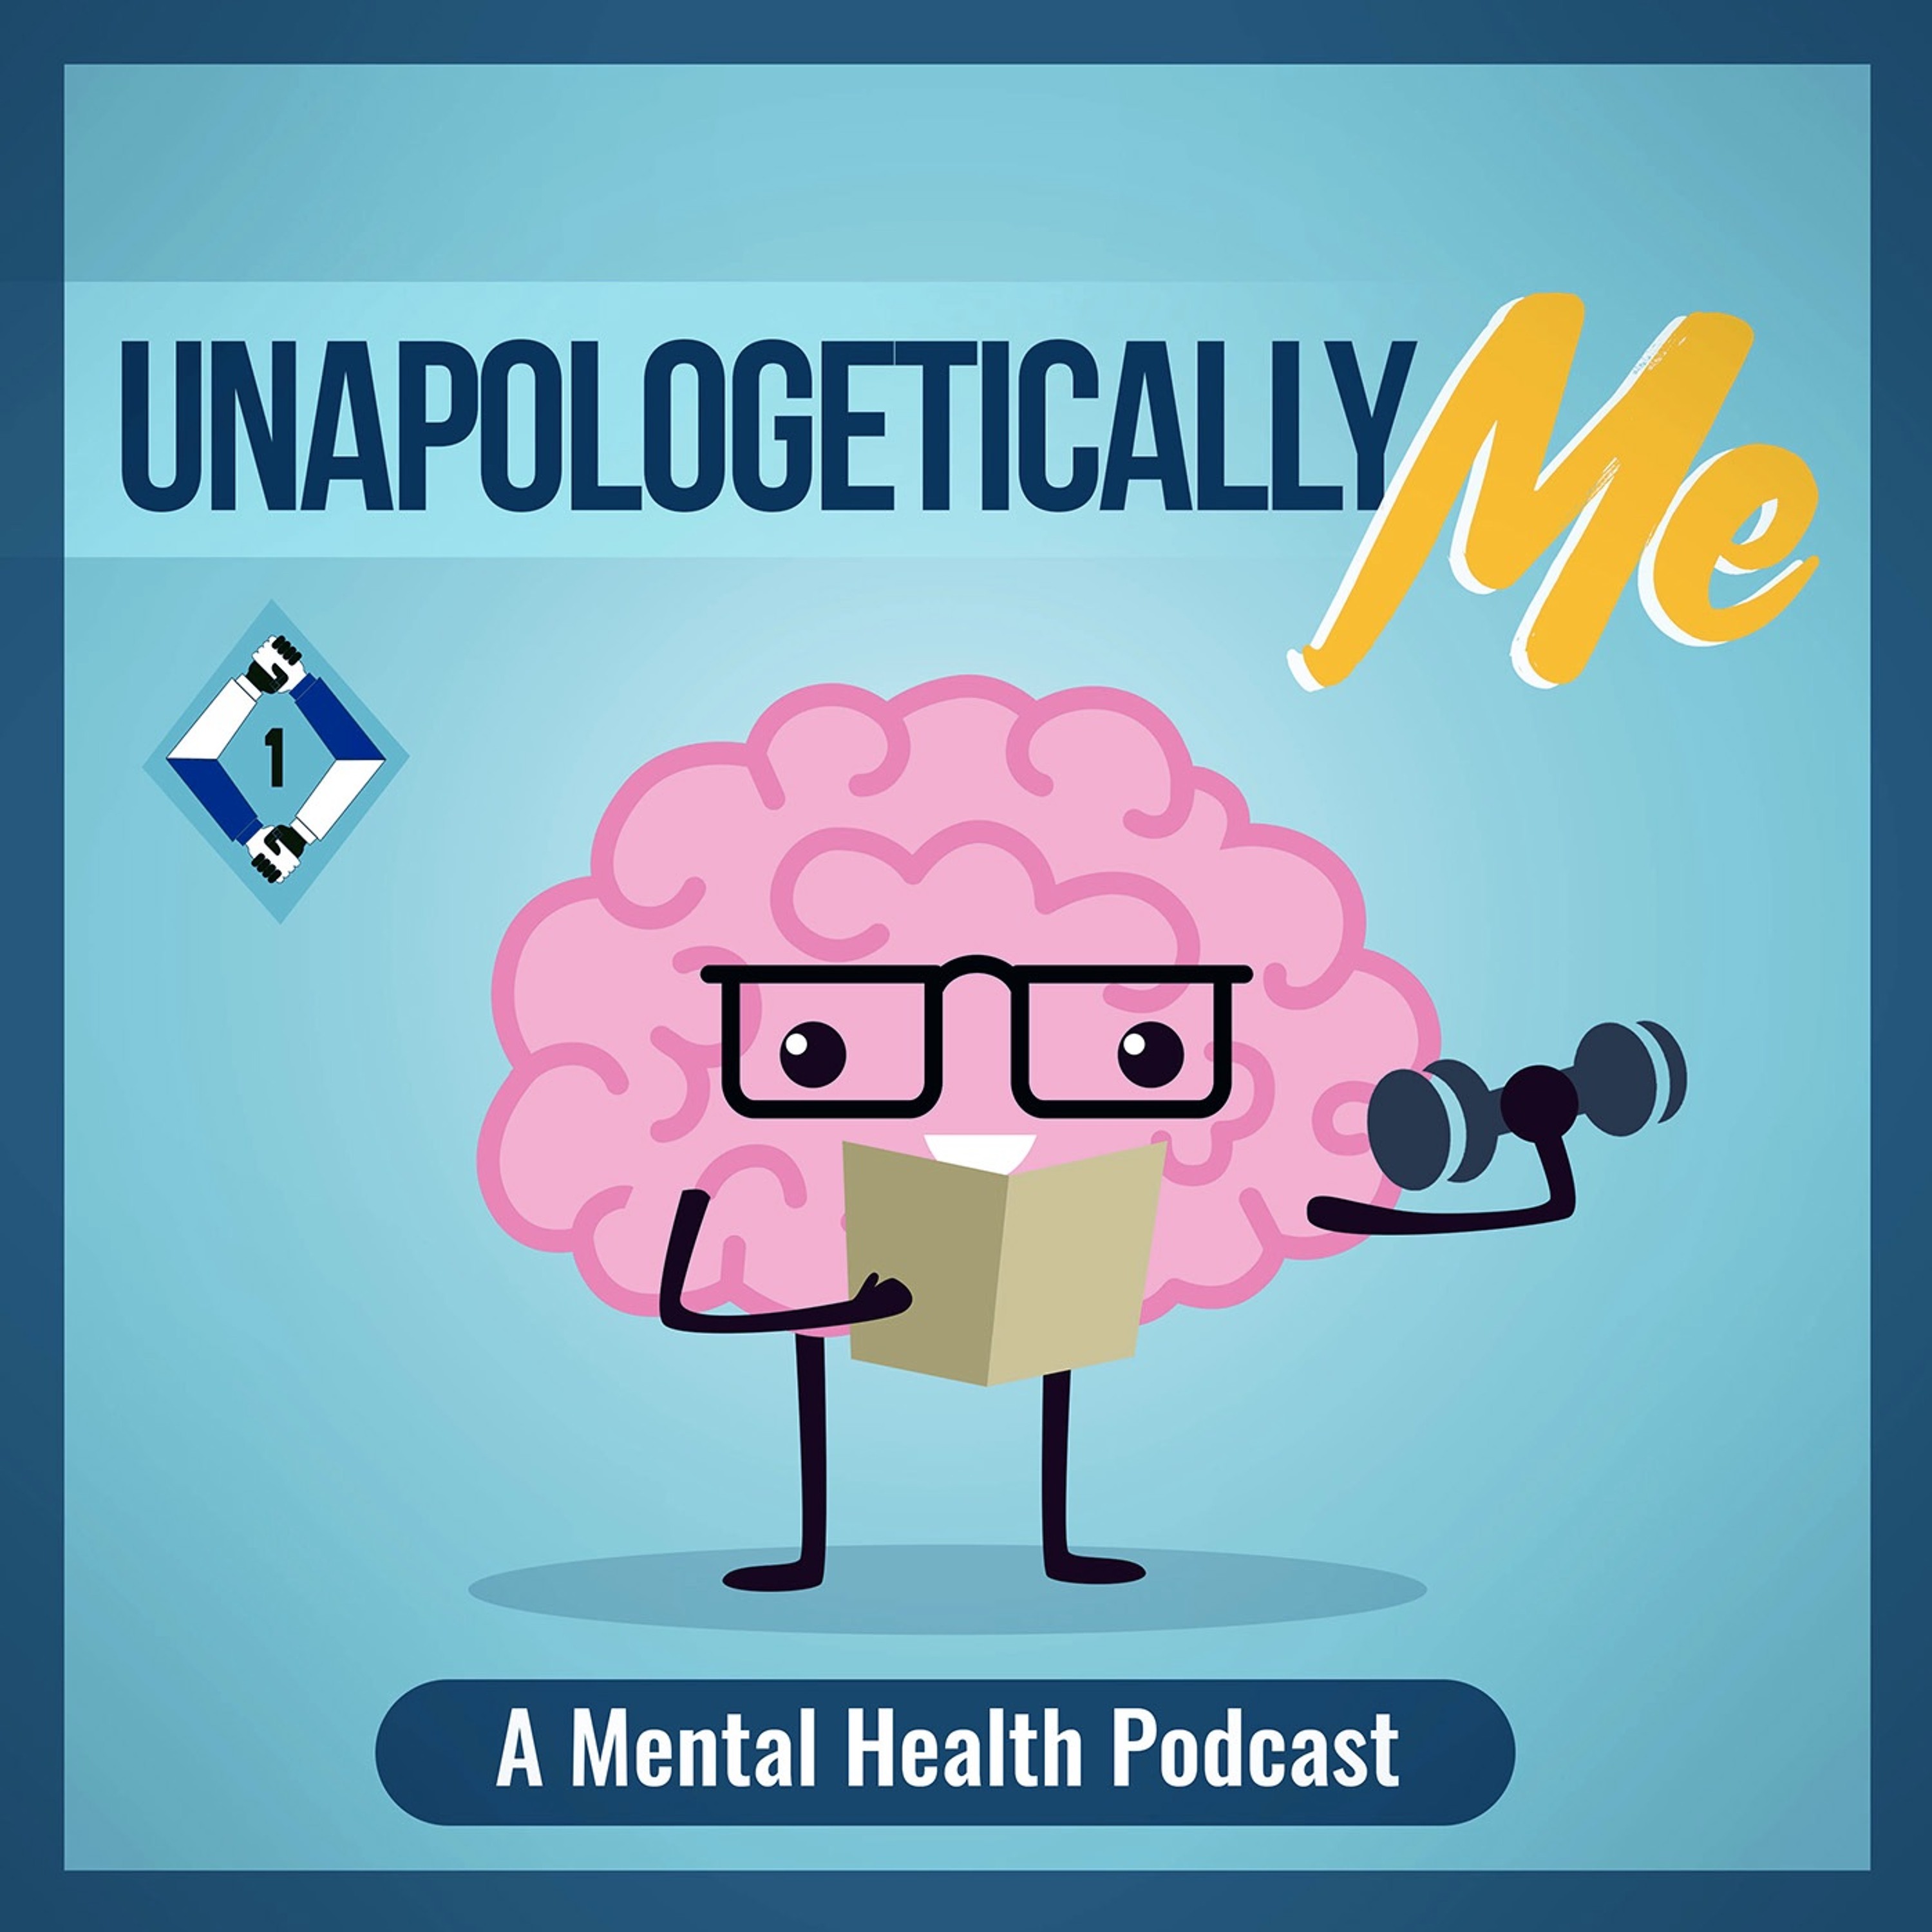 Unapologetically Me: A Mental Health Podcast - Greatness Every Day